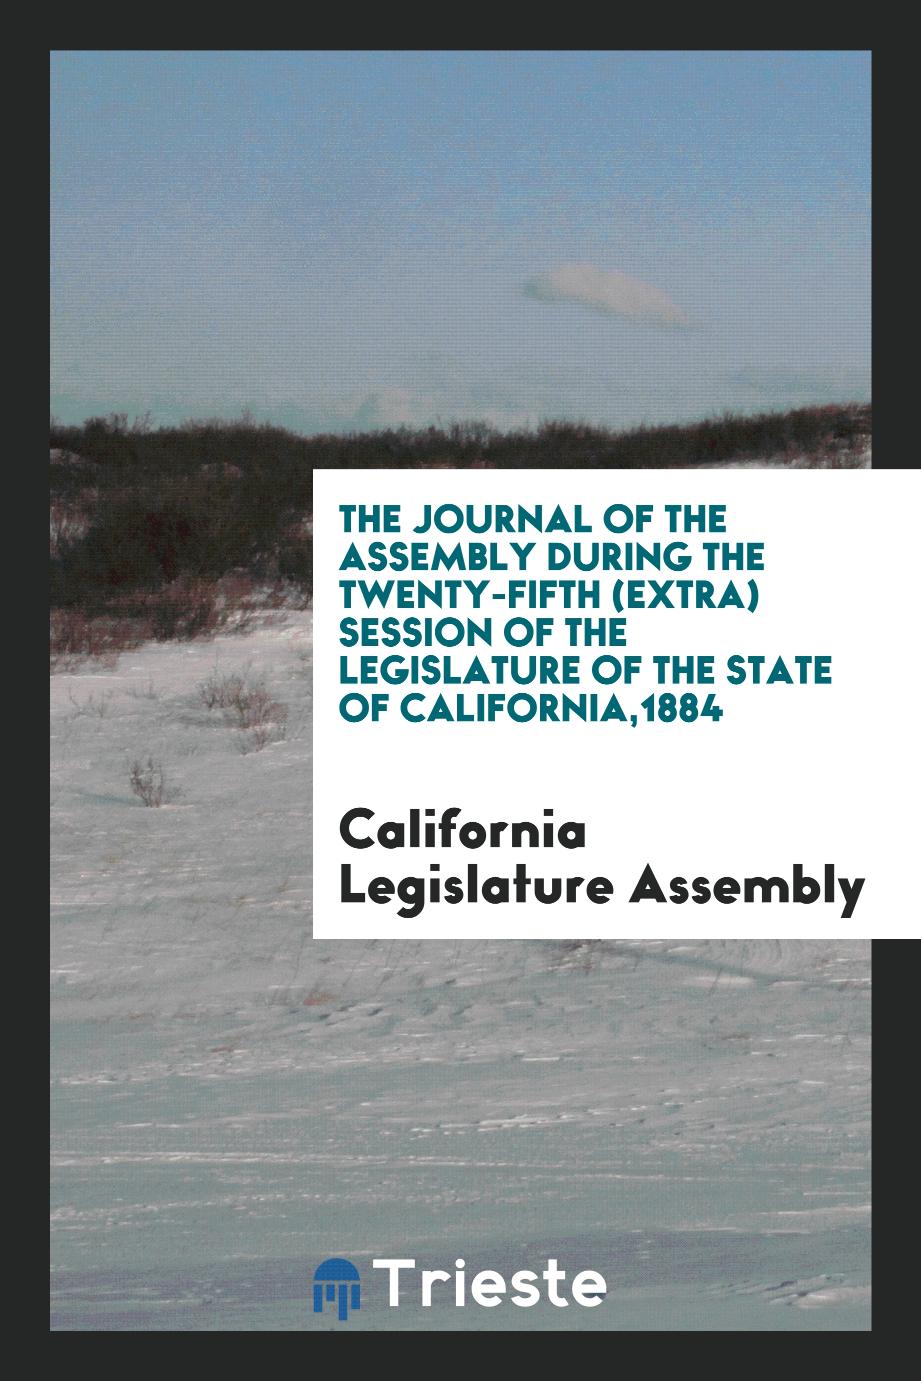 The Journal of the Assembly During the Twenty-Fifth (Extra) Session of the Legislature of the State of California,1884